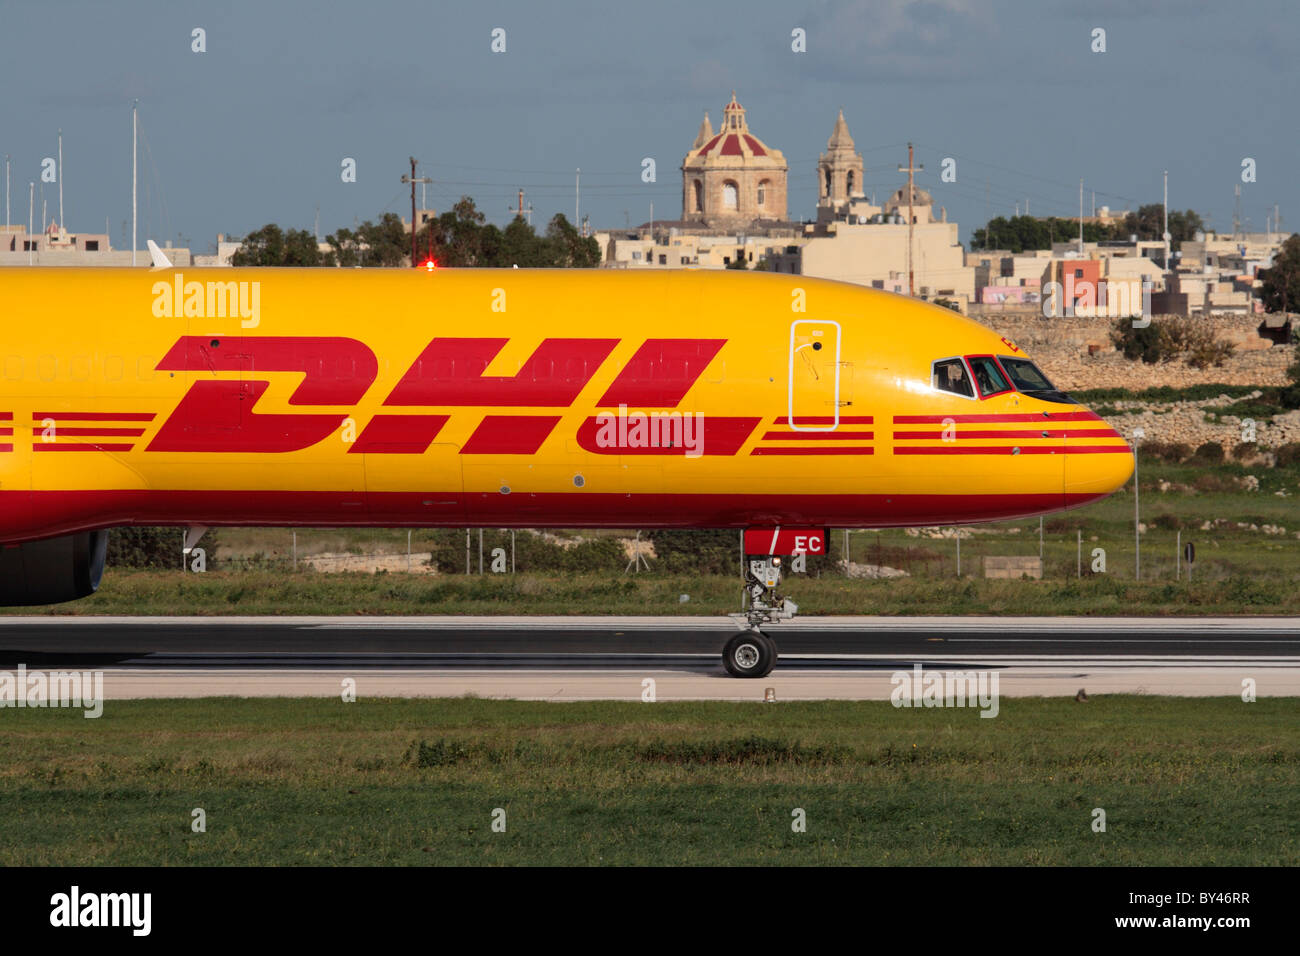 International trade and air freight transport. DHL Boeing 757-200F cargo plane taxiing for departure from the Mediterranean island state of Malta Stock Photo